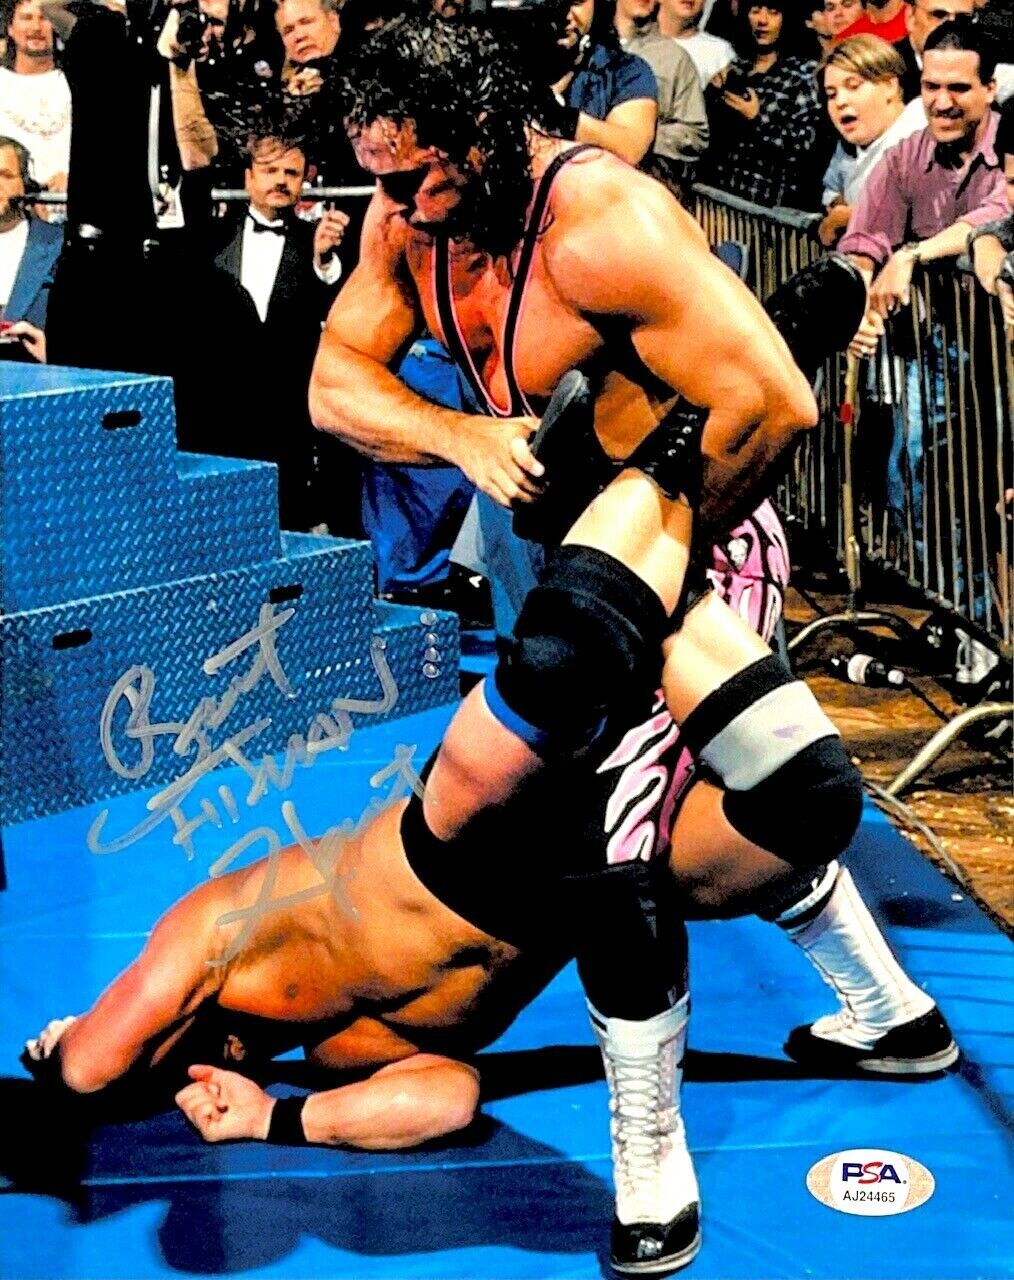 WWE BRET HART HAND SIGNED AUTOGRAPHED 8X10 WRESTLING Photo Poster painting WITH PSA DNA COA 6